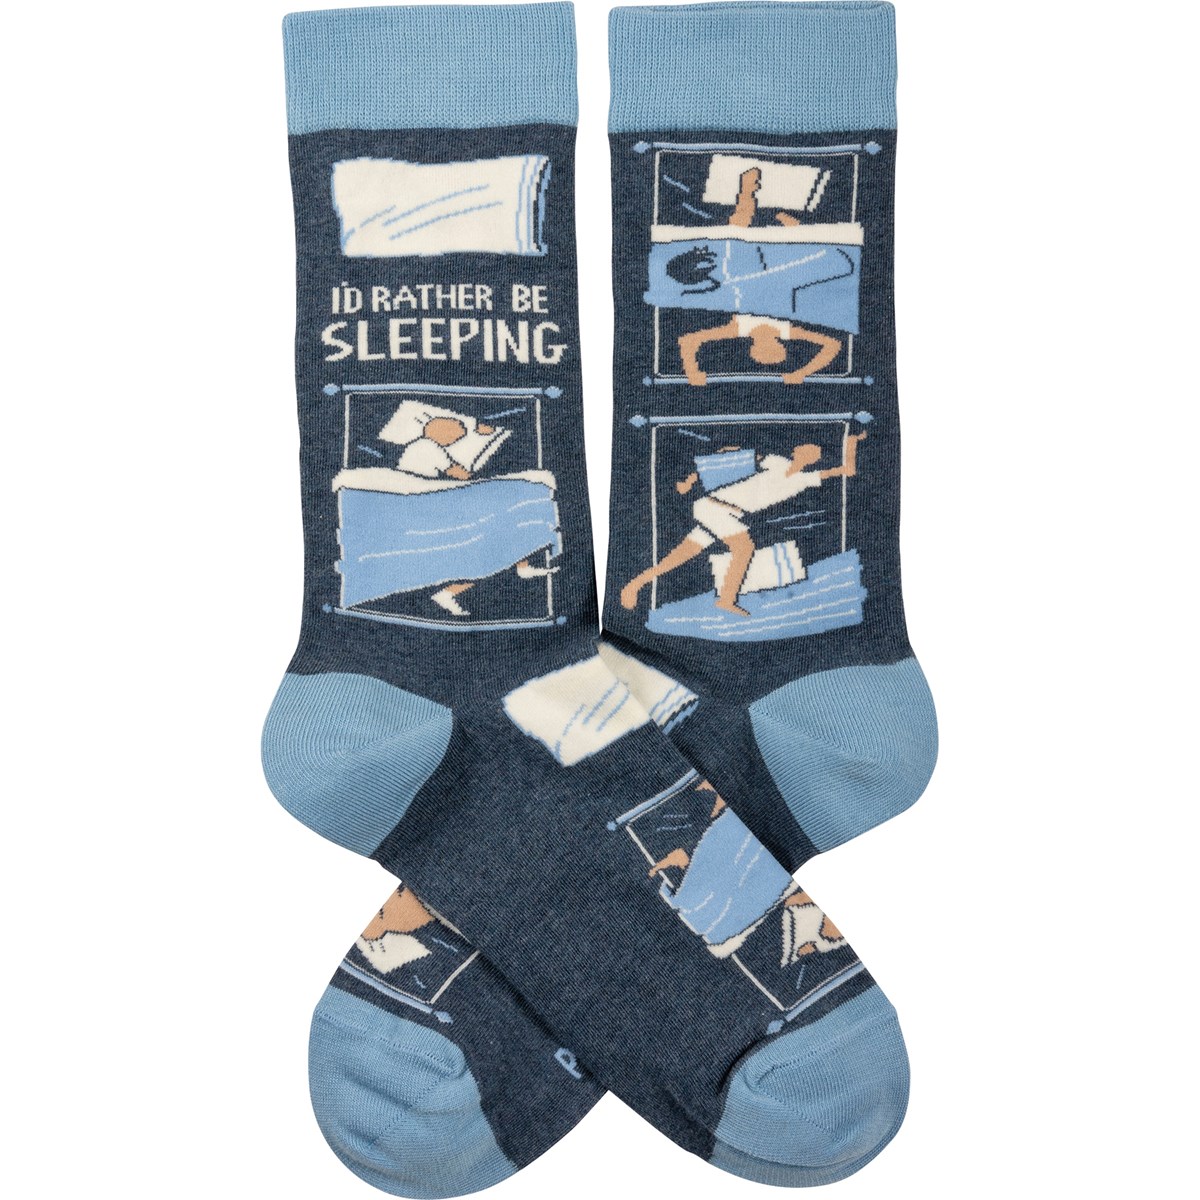 Socks - I'd Rather Be Sleeping - One Size Fits Most - Cotton, Nylon, Spandex